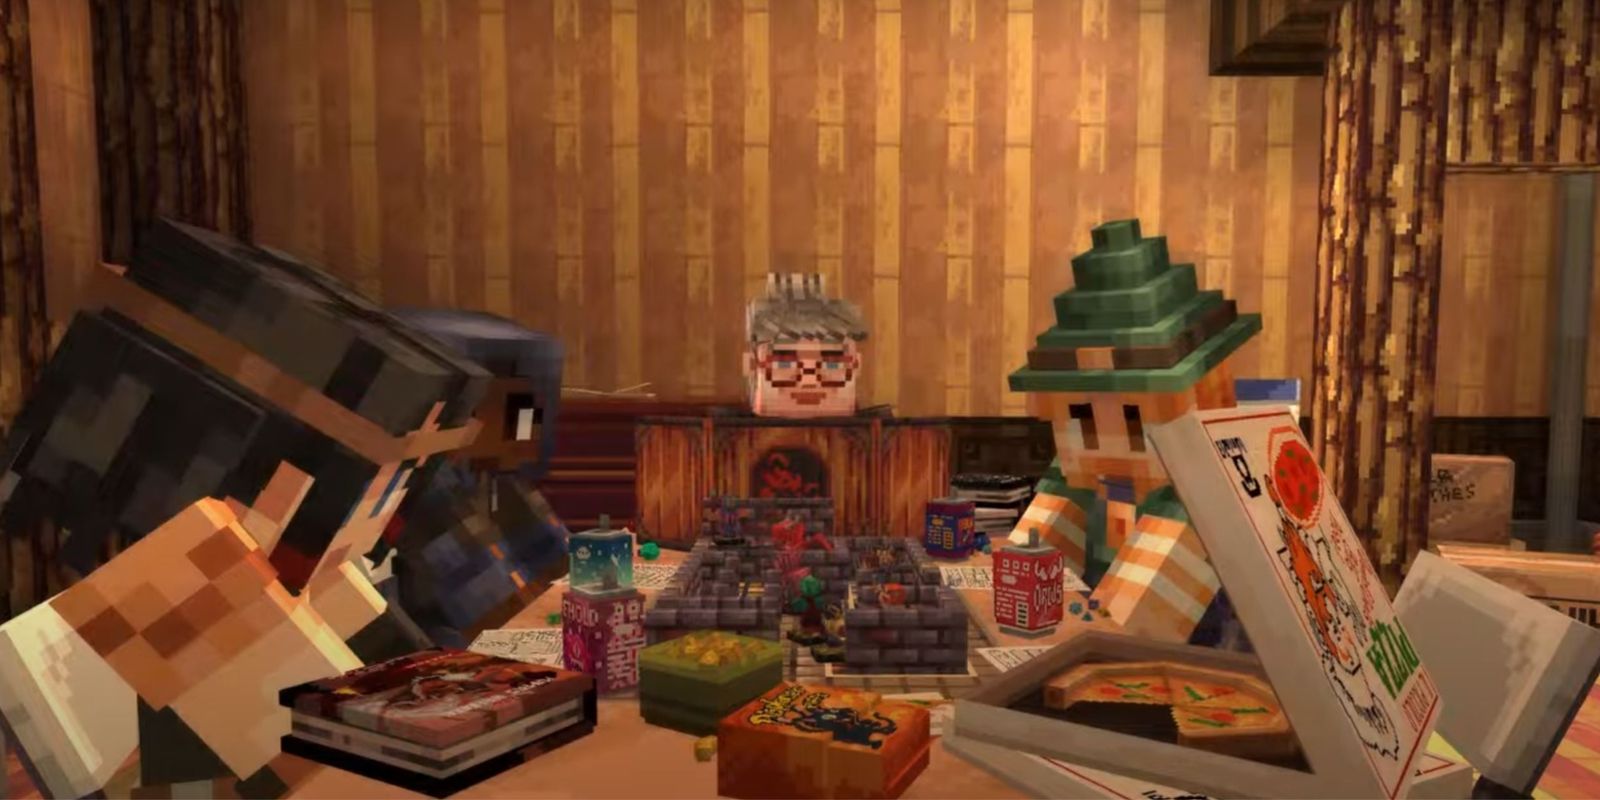 Minecraft characters sitting around a table playing Dungeons and Dragons with pizza boxes and sodas on the table